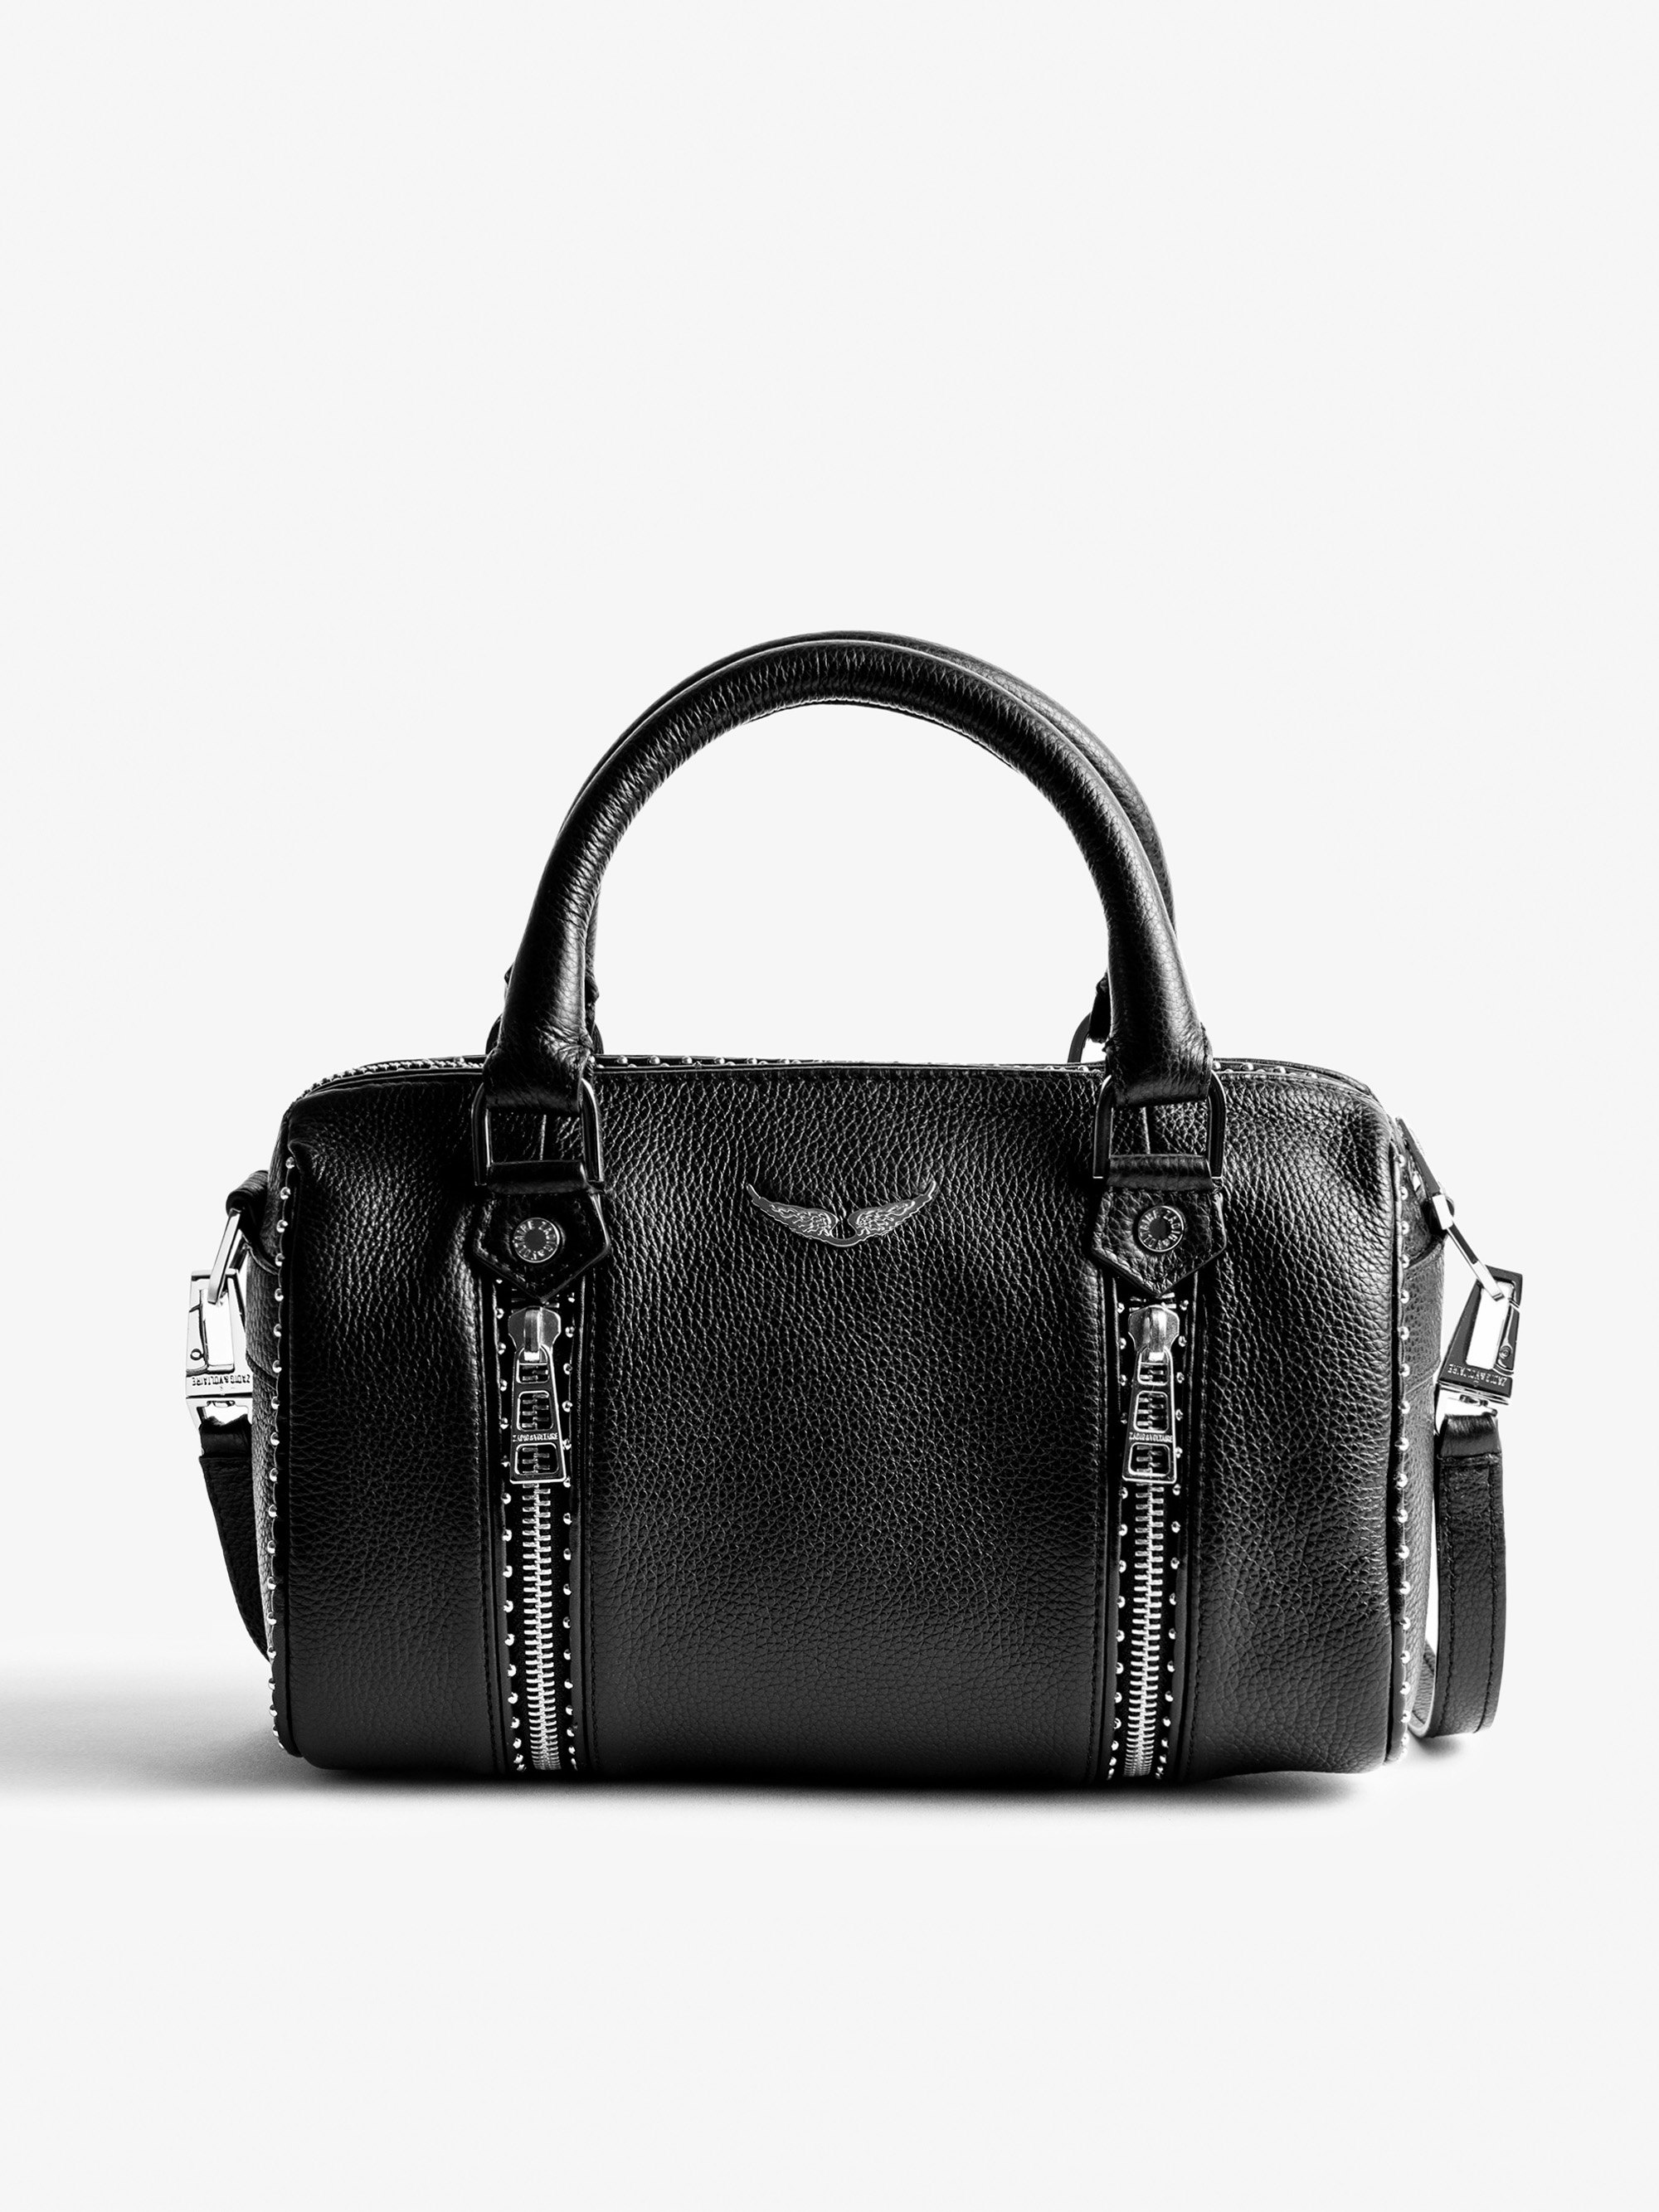 Sunny XS Studs Bag - Women's small black bag in grained leather.